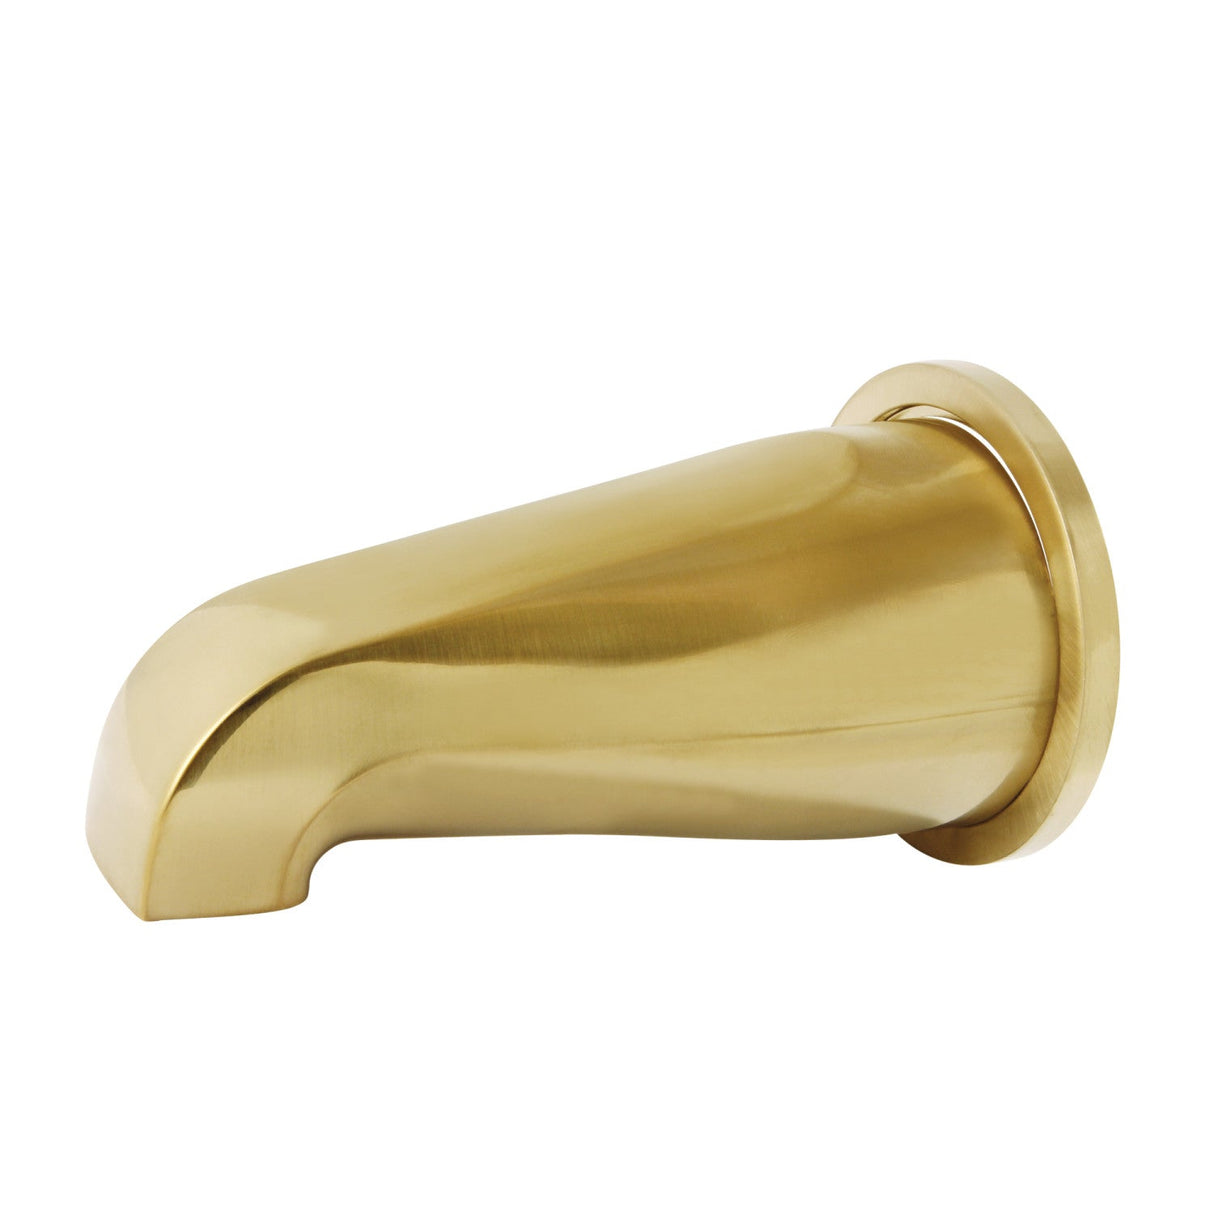 Shower Scape K187E7 5-Inch Non-Diverter Tub Spout with Flange, Brushed Brass